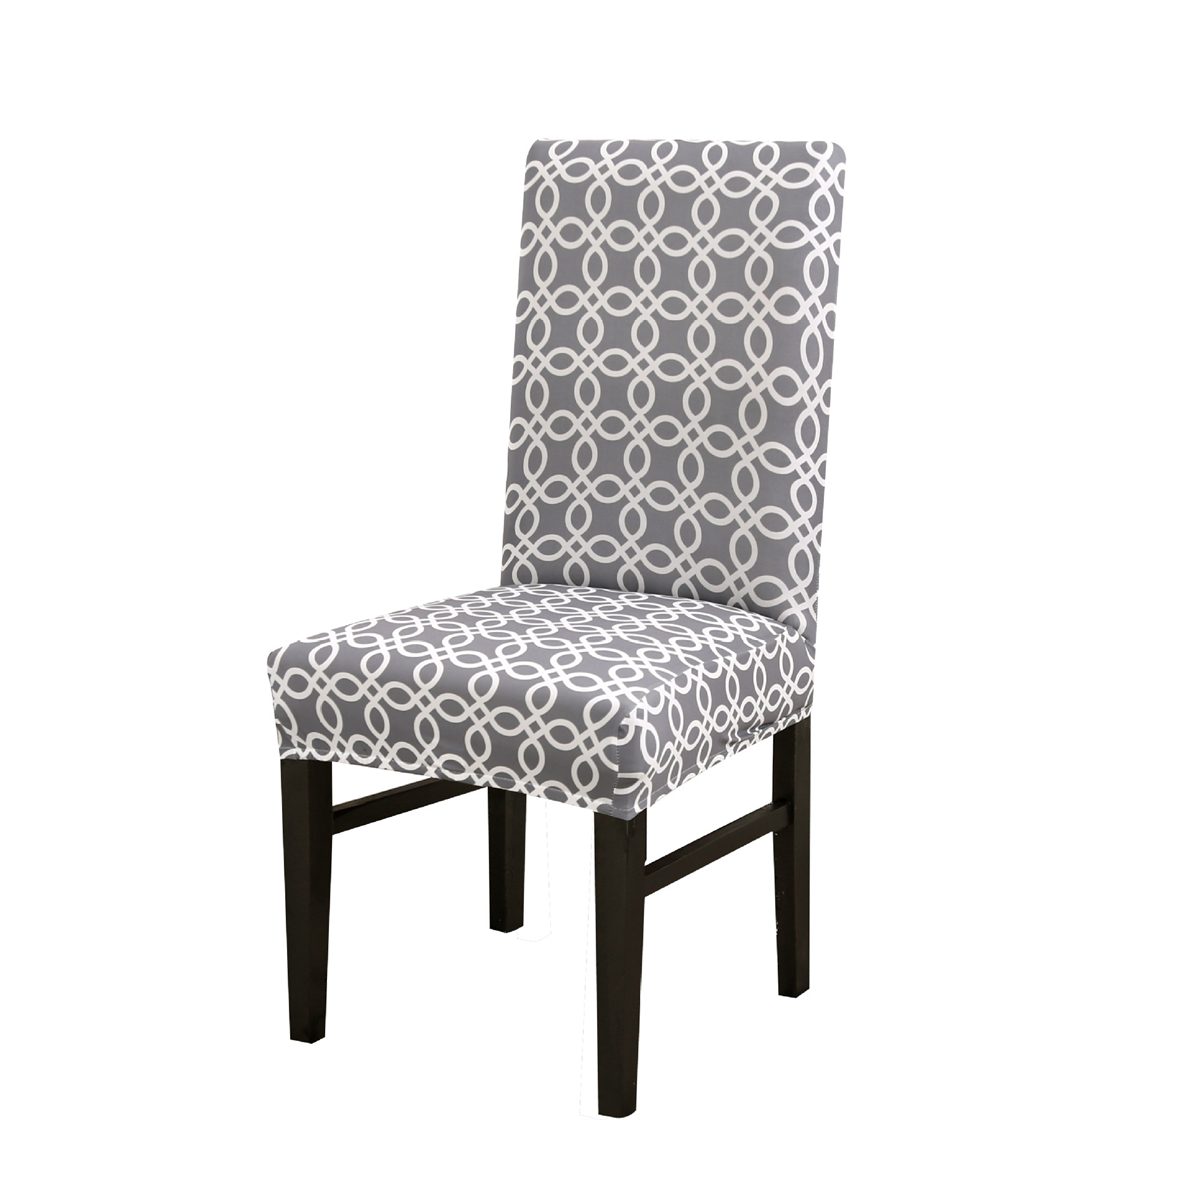 Elastic-Dining-Chair-Cover-Stain-resistant-Geometry-Printing-Seat-Chair-Cover-Spandex-Elastic-Seat-C-1925458-11